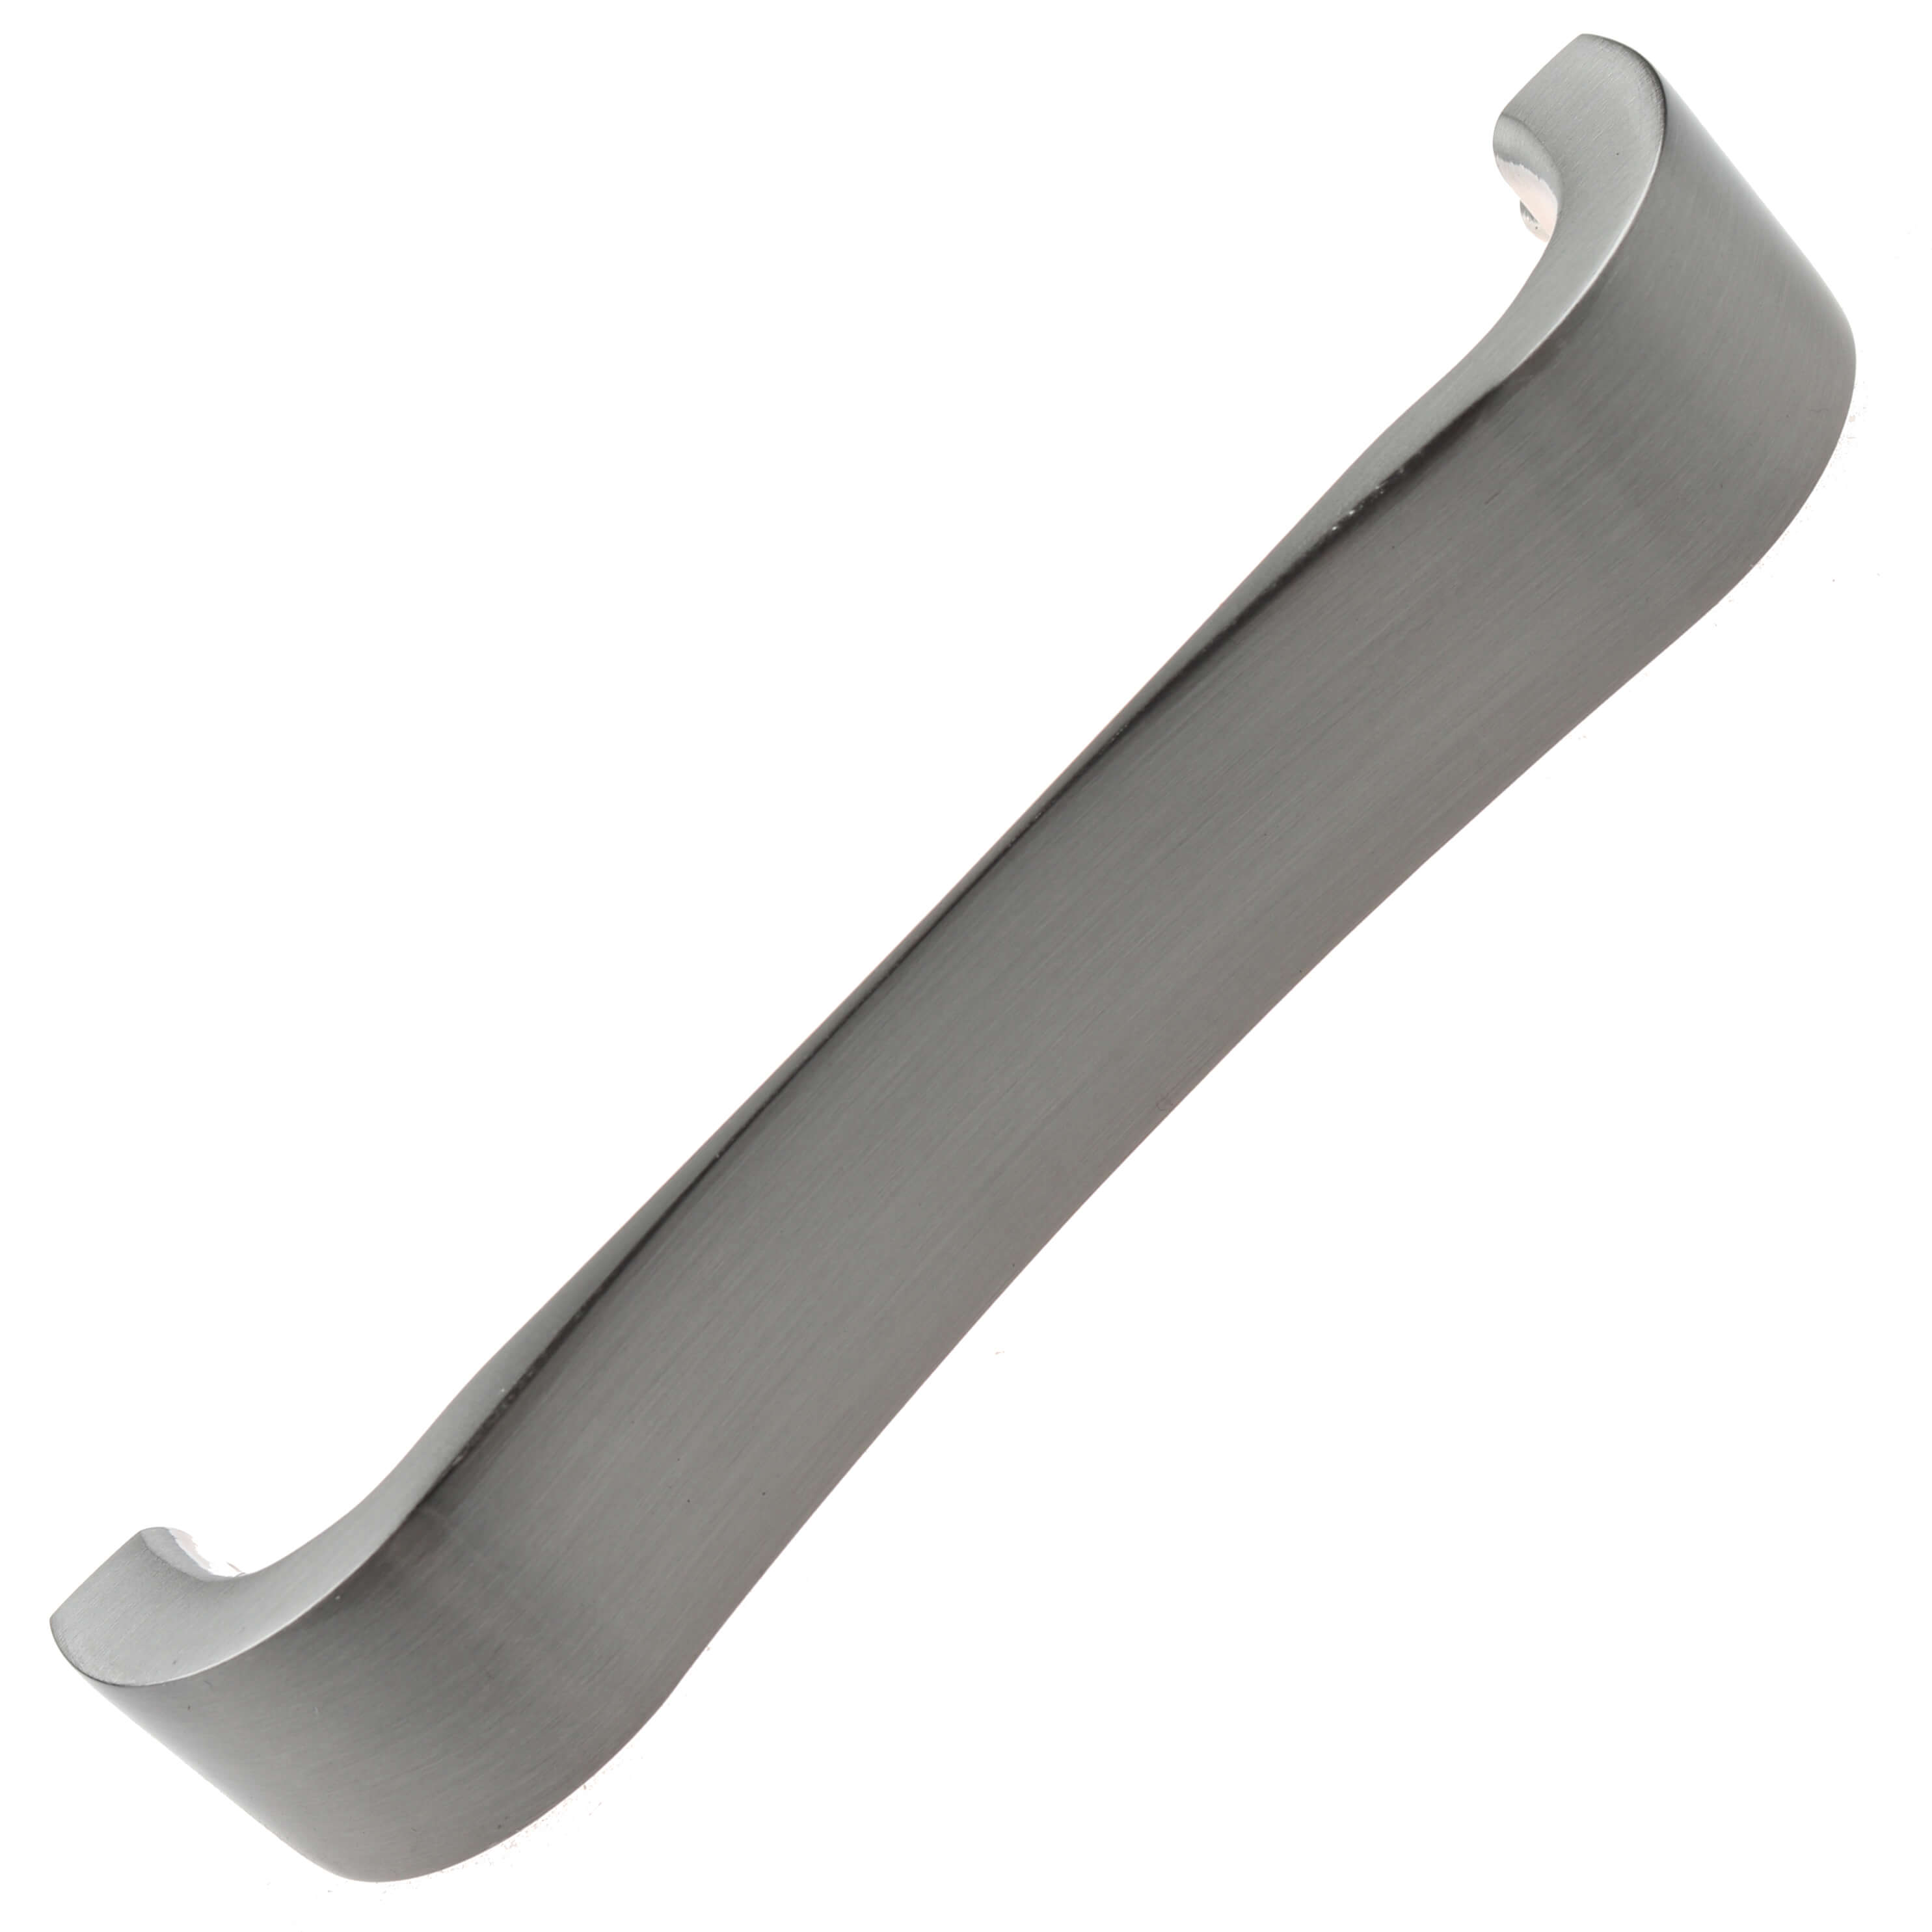 4-1/2 in. Center Smooth Curved Flat Cabinet Pull Handles, Satin Nickel, Pack of 25 - image 1 of 3